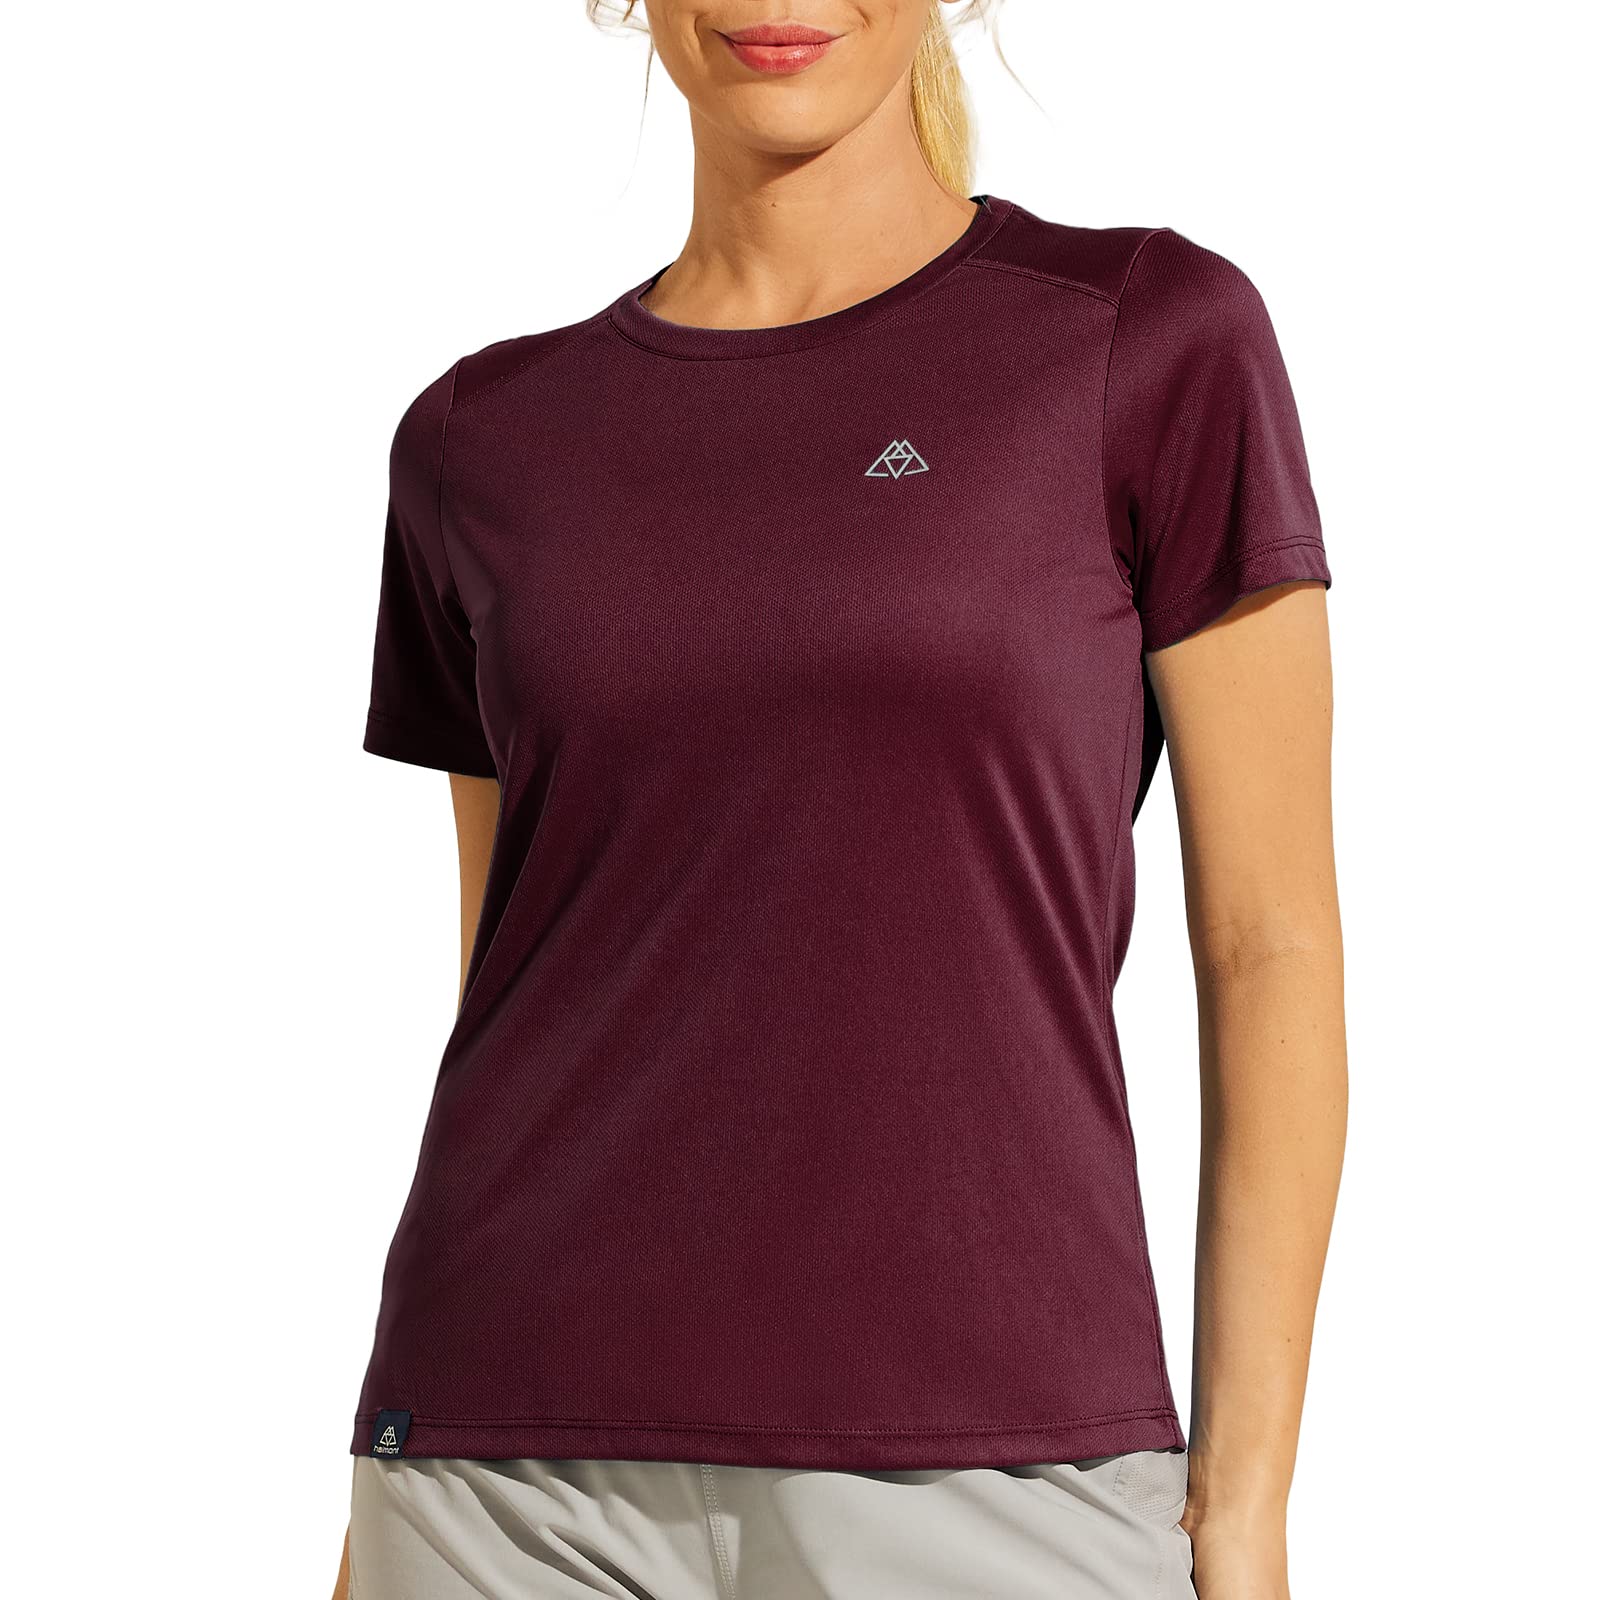 Women Sports T-Shirt Mesh Splicing Back Hollow Out Tight Fitting Short  Sleeves Moisture-Wicking Athletic Yoga Running Shirt Tops-Daerzy :  : Clothing & Accessories